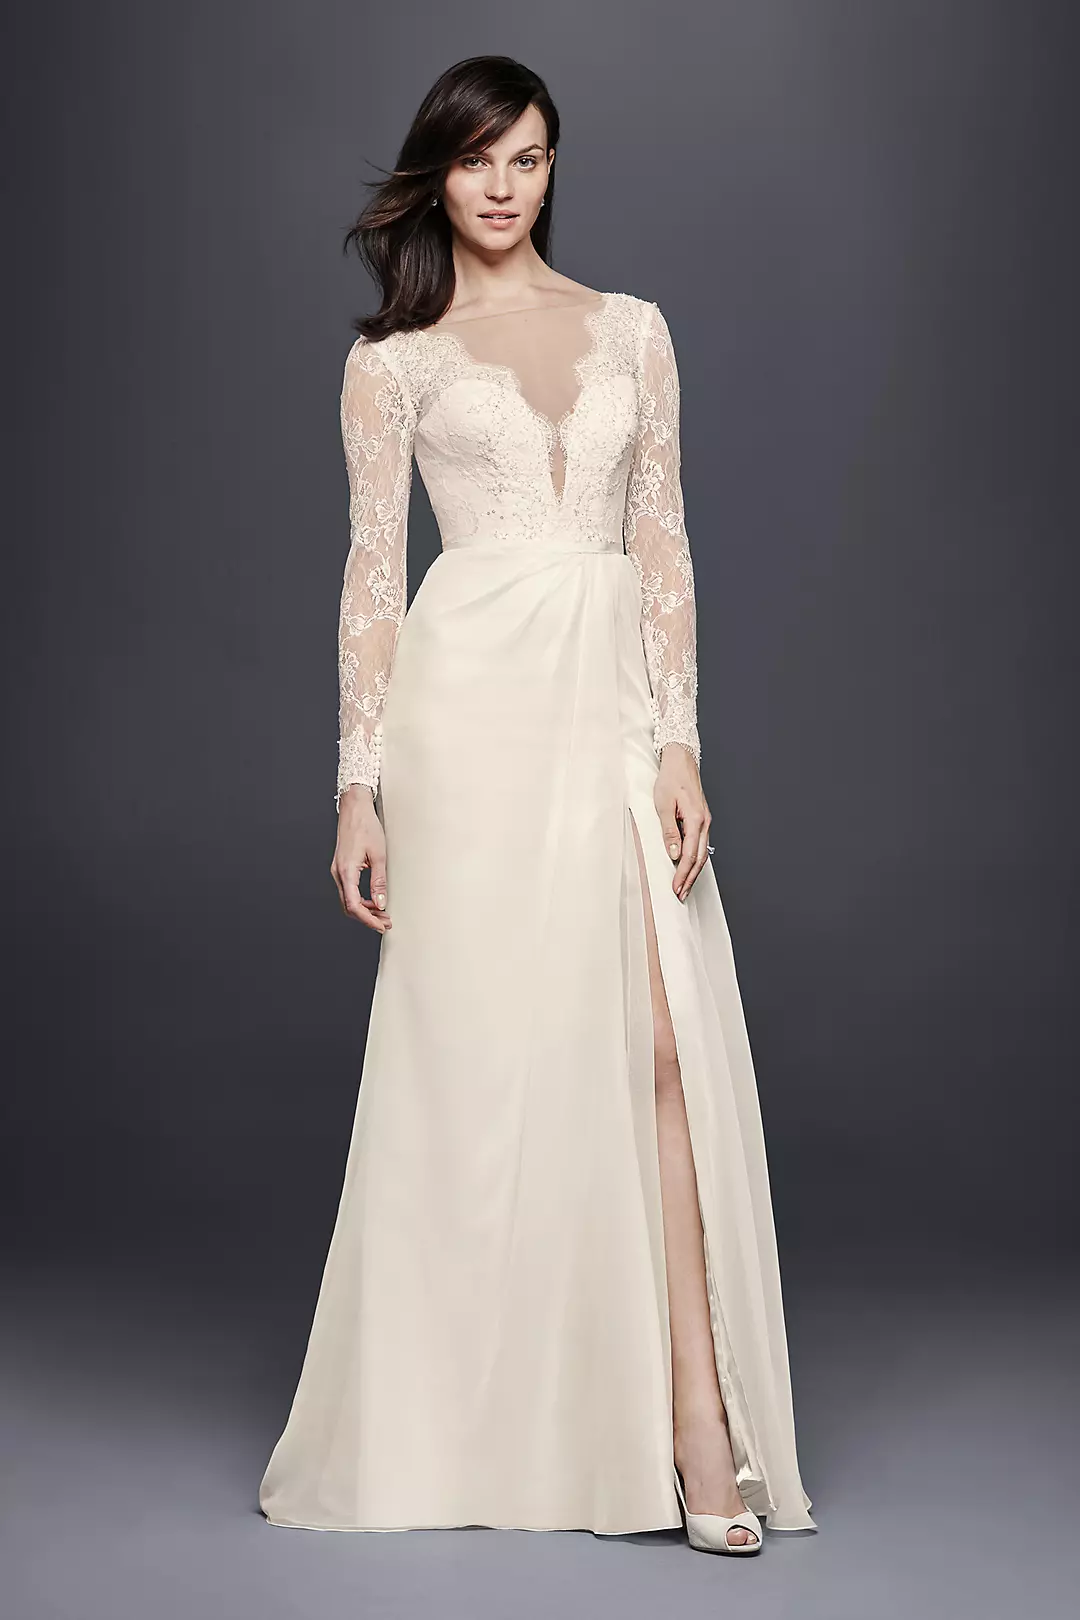 Chiffon Wedding Dress with Low V-Neck and Back Image